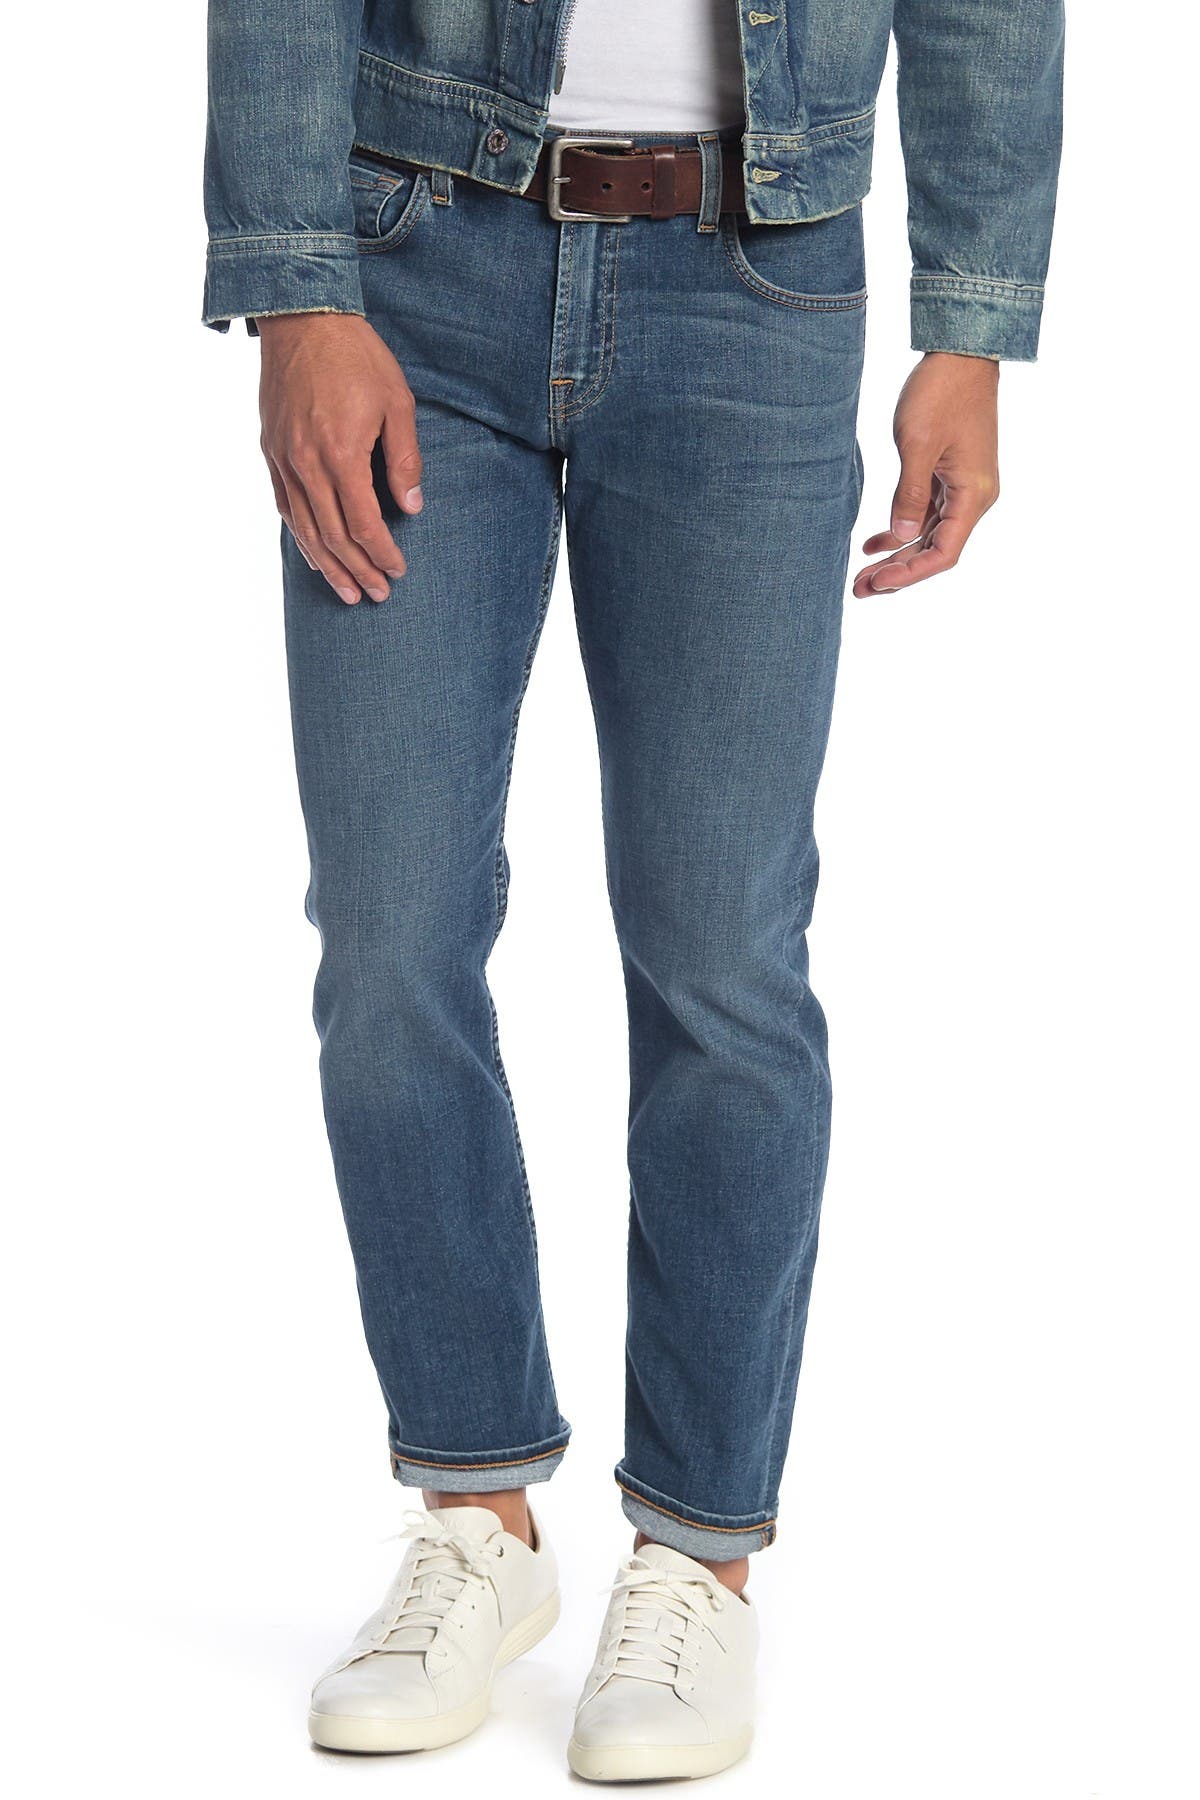 7 For All Mankind Slimmy Slim Jeans In Dark Blue1